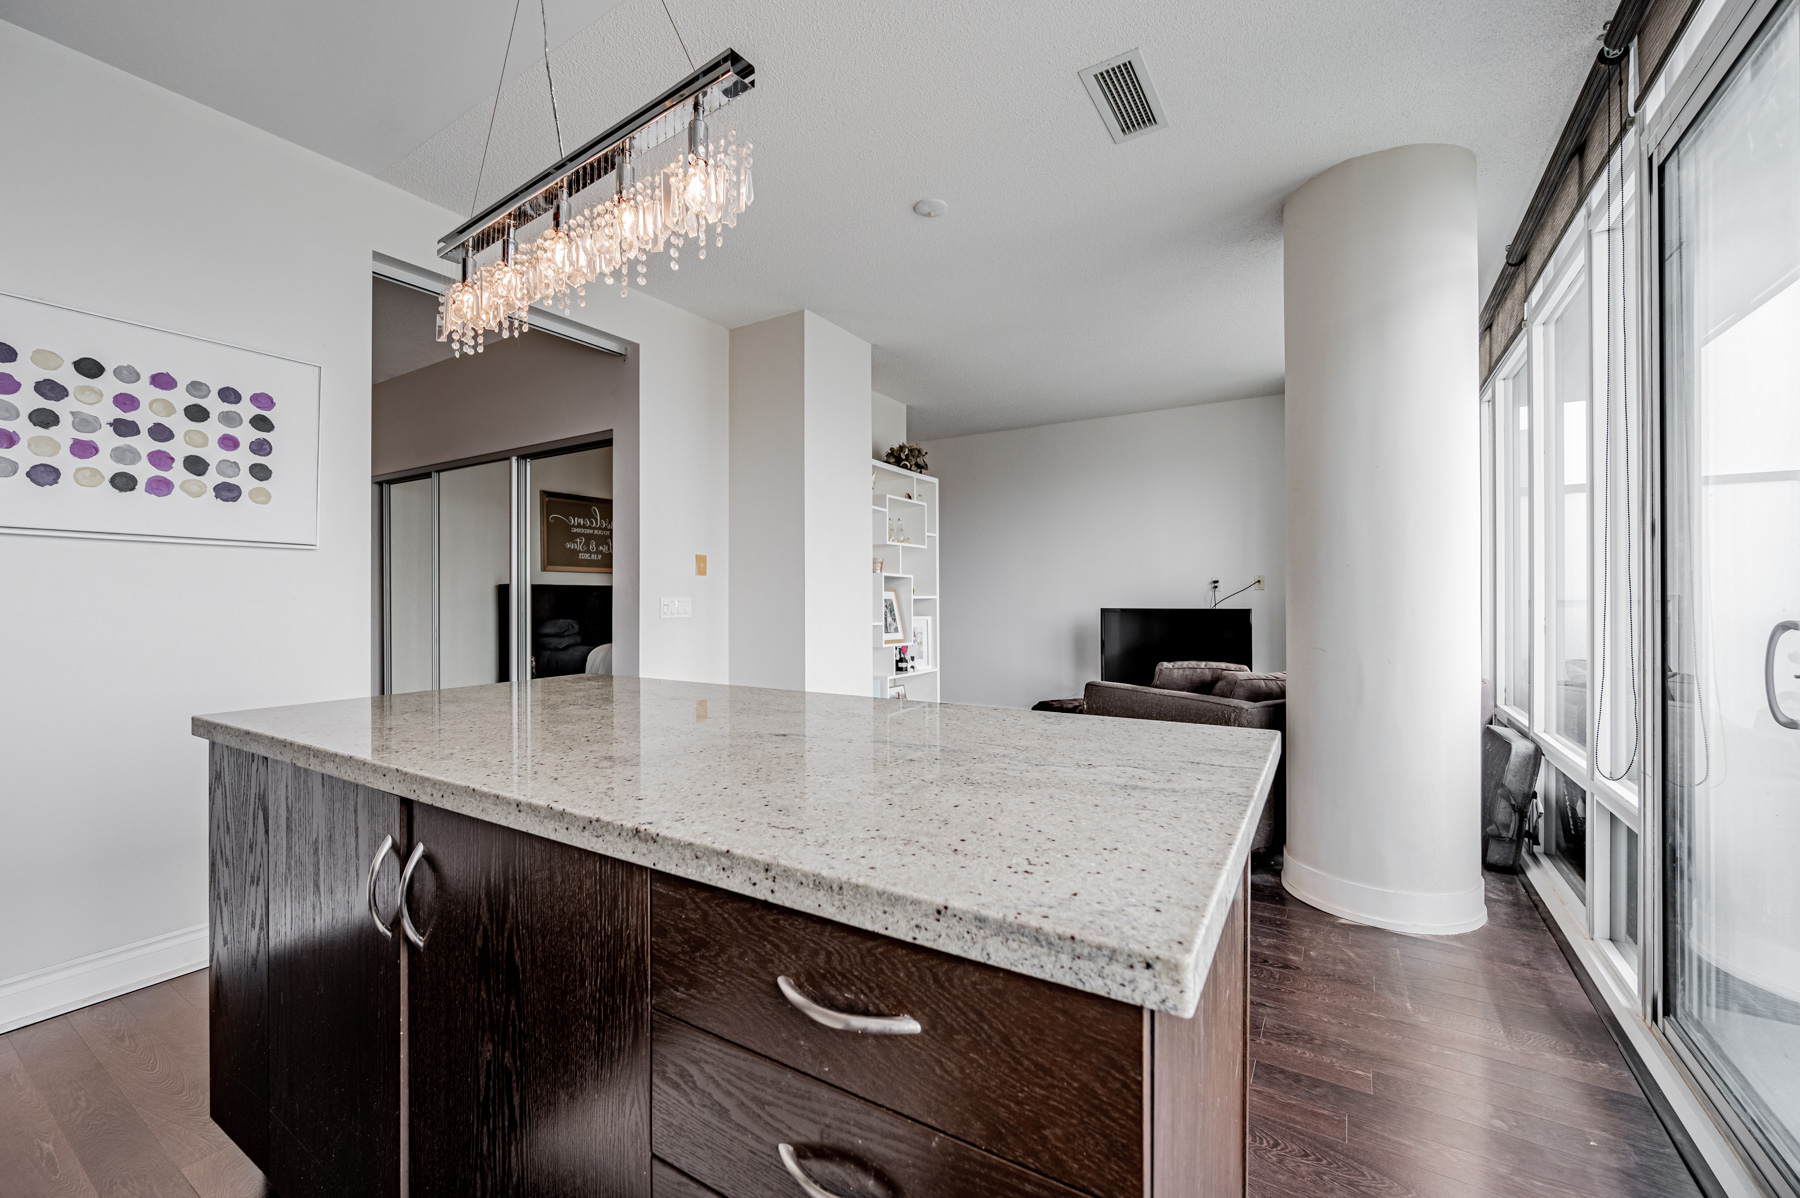 Condo kitchen with classy chandelier hung over centre island.